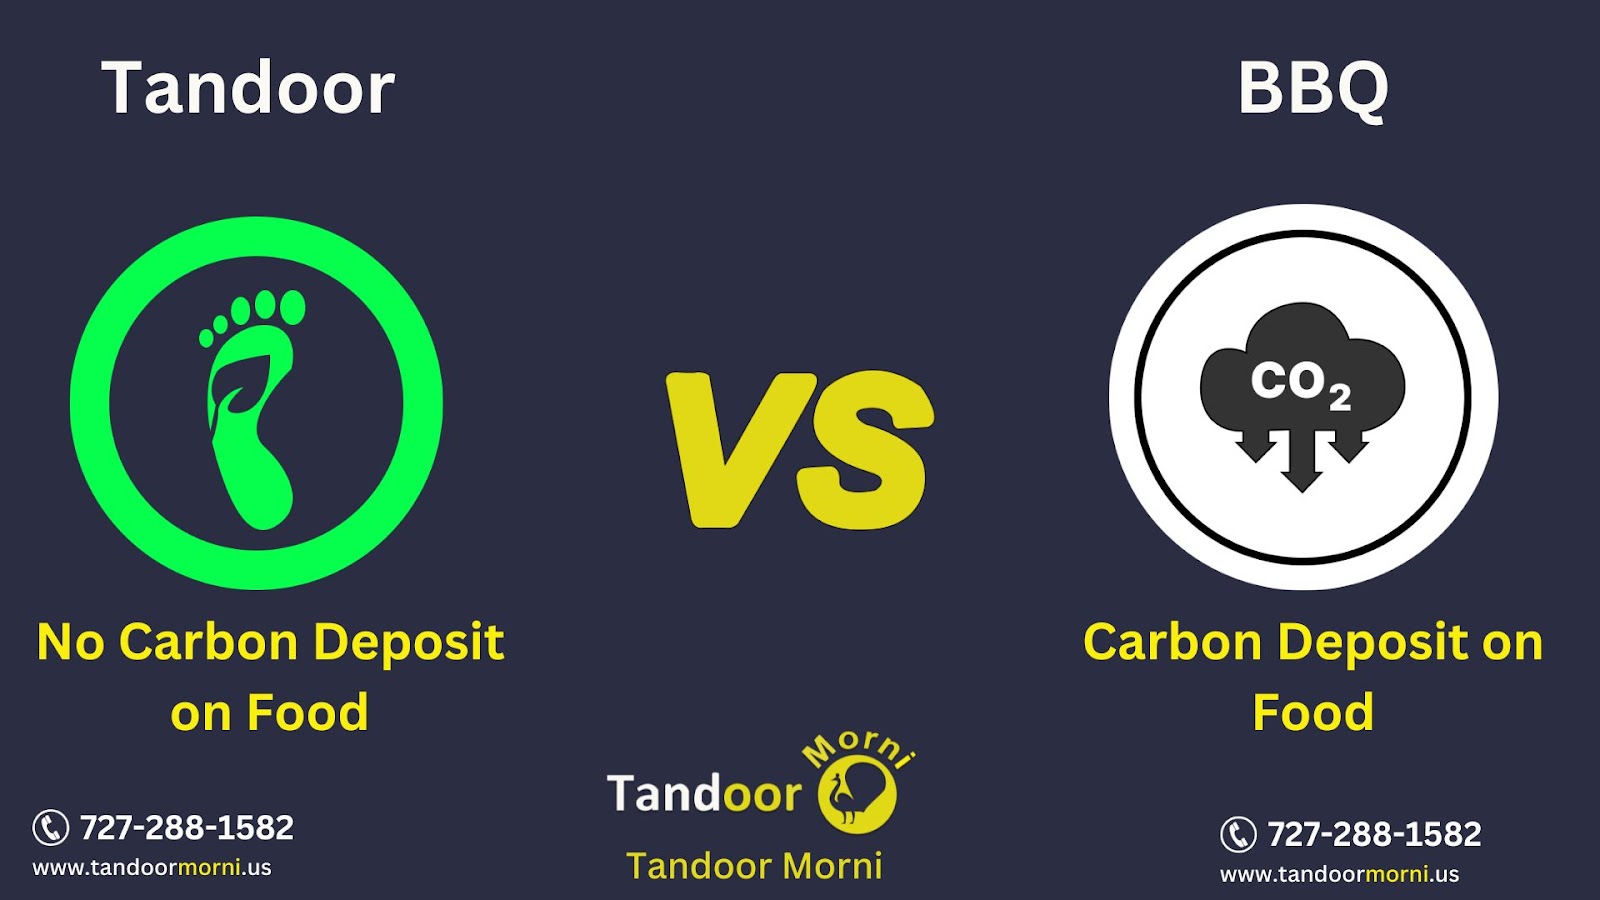 In this image, we see bbq vs tandoor, with no carbon deposit on the food in the tandoor vs. carbon deposit on the food in the bbq.